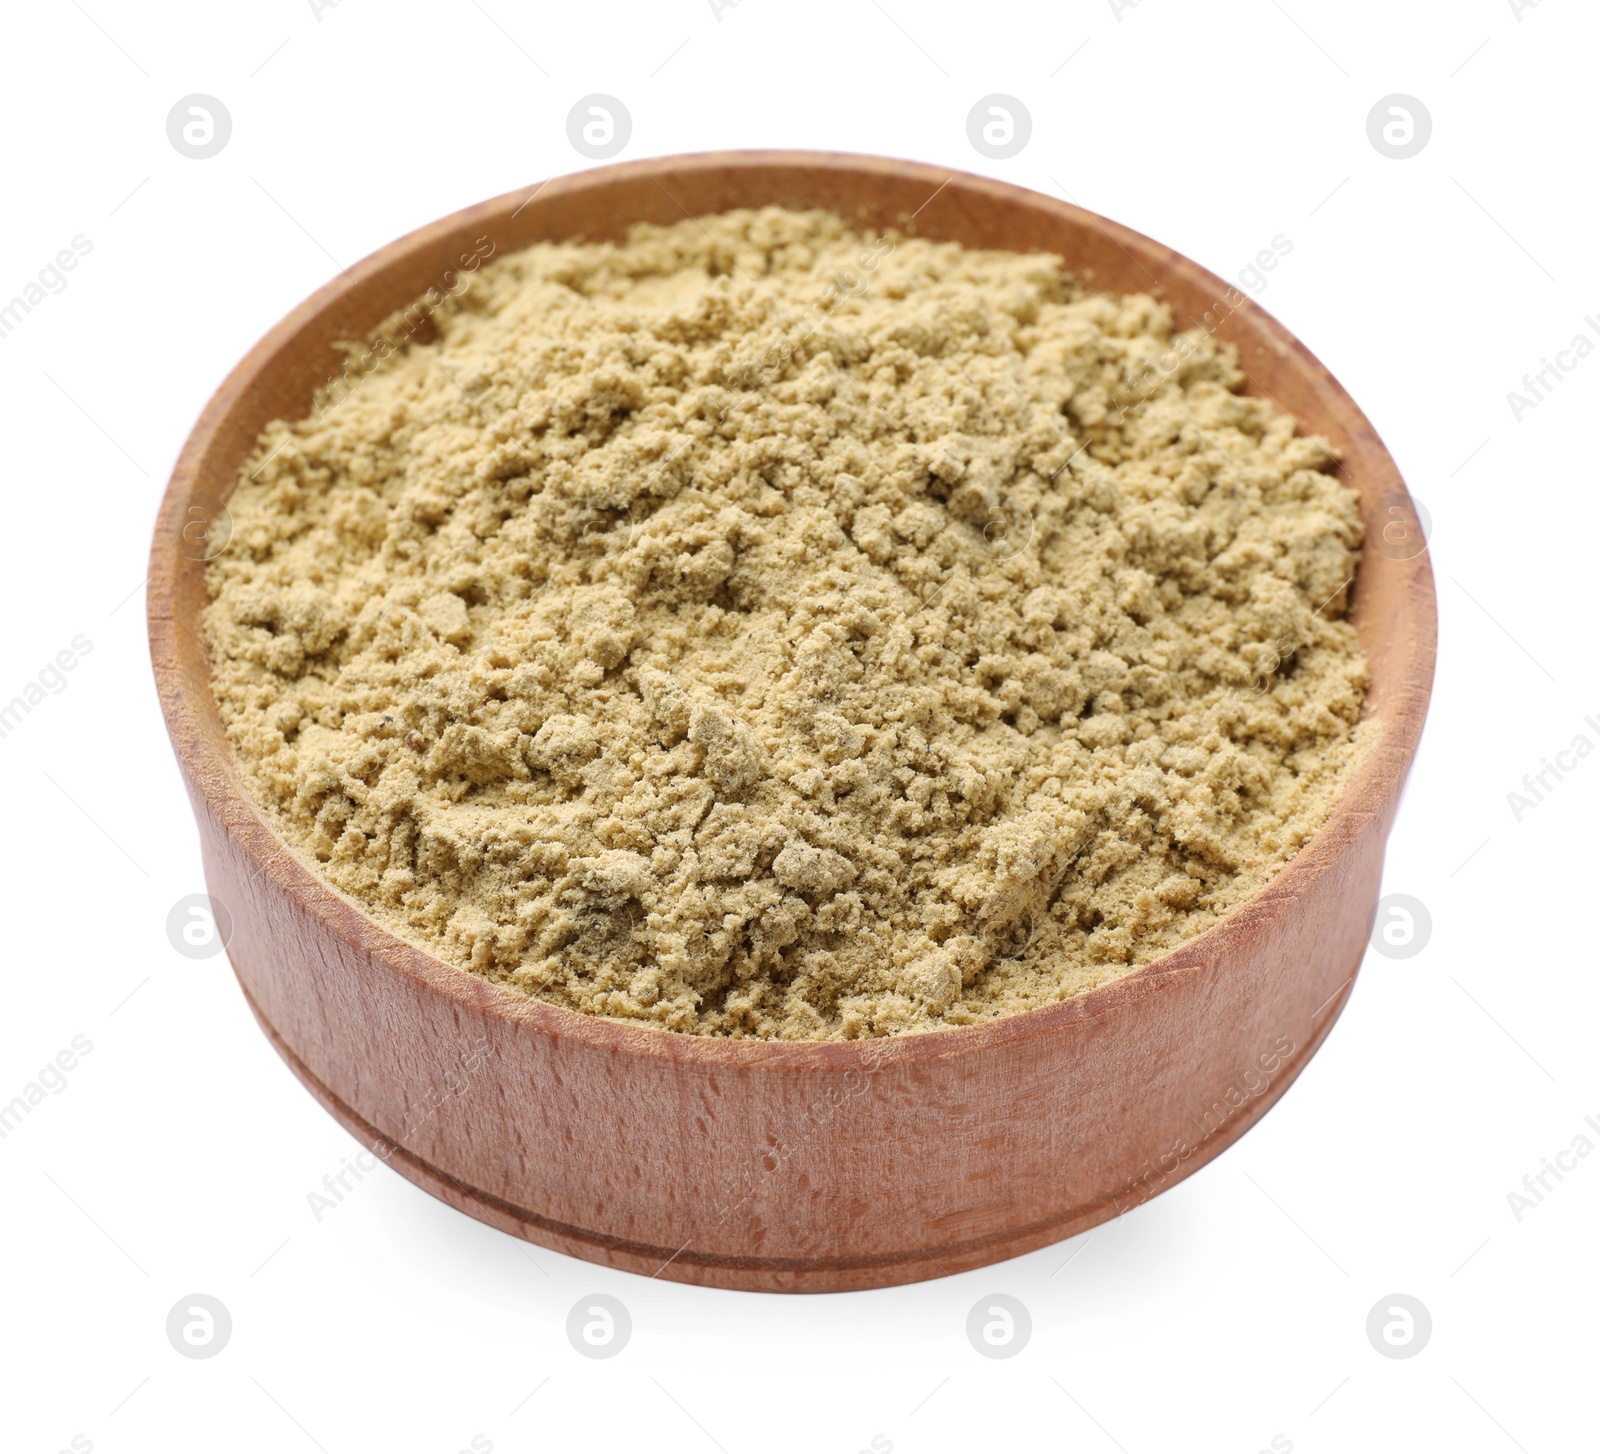 Photo of Aromatic ginger powder in wooden bowl on white background